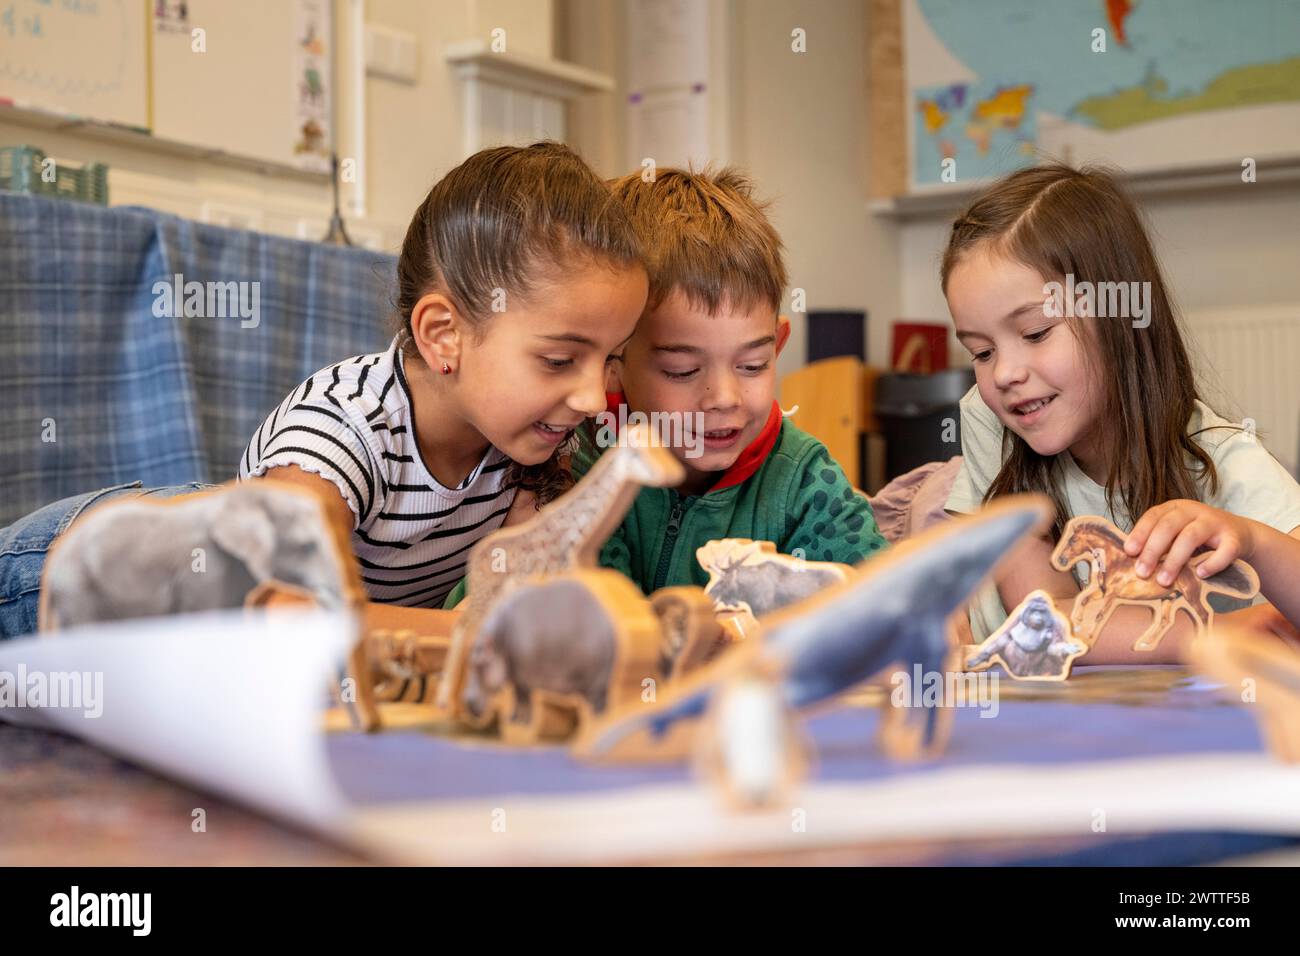 Three kids engaged and delighted, exploring a world of toy dinosaurs together. Stock Photo